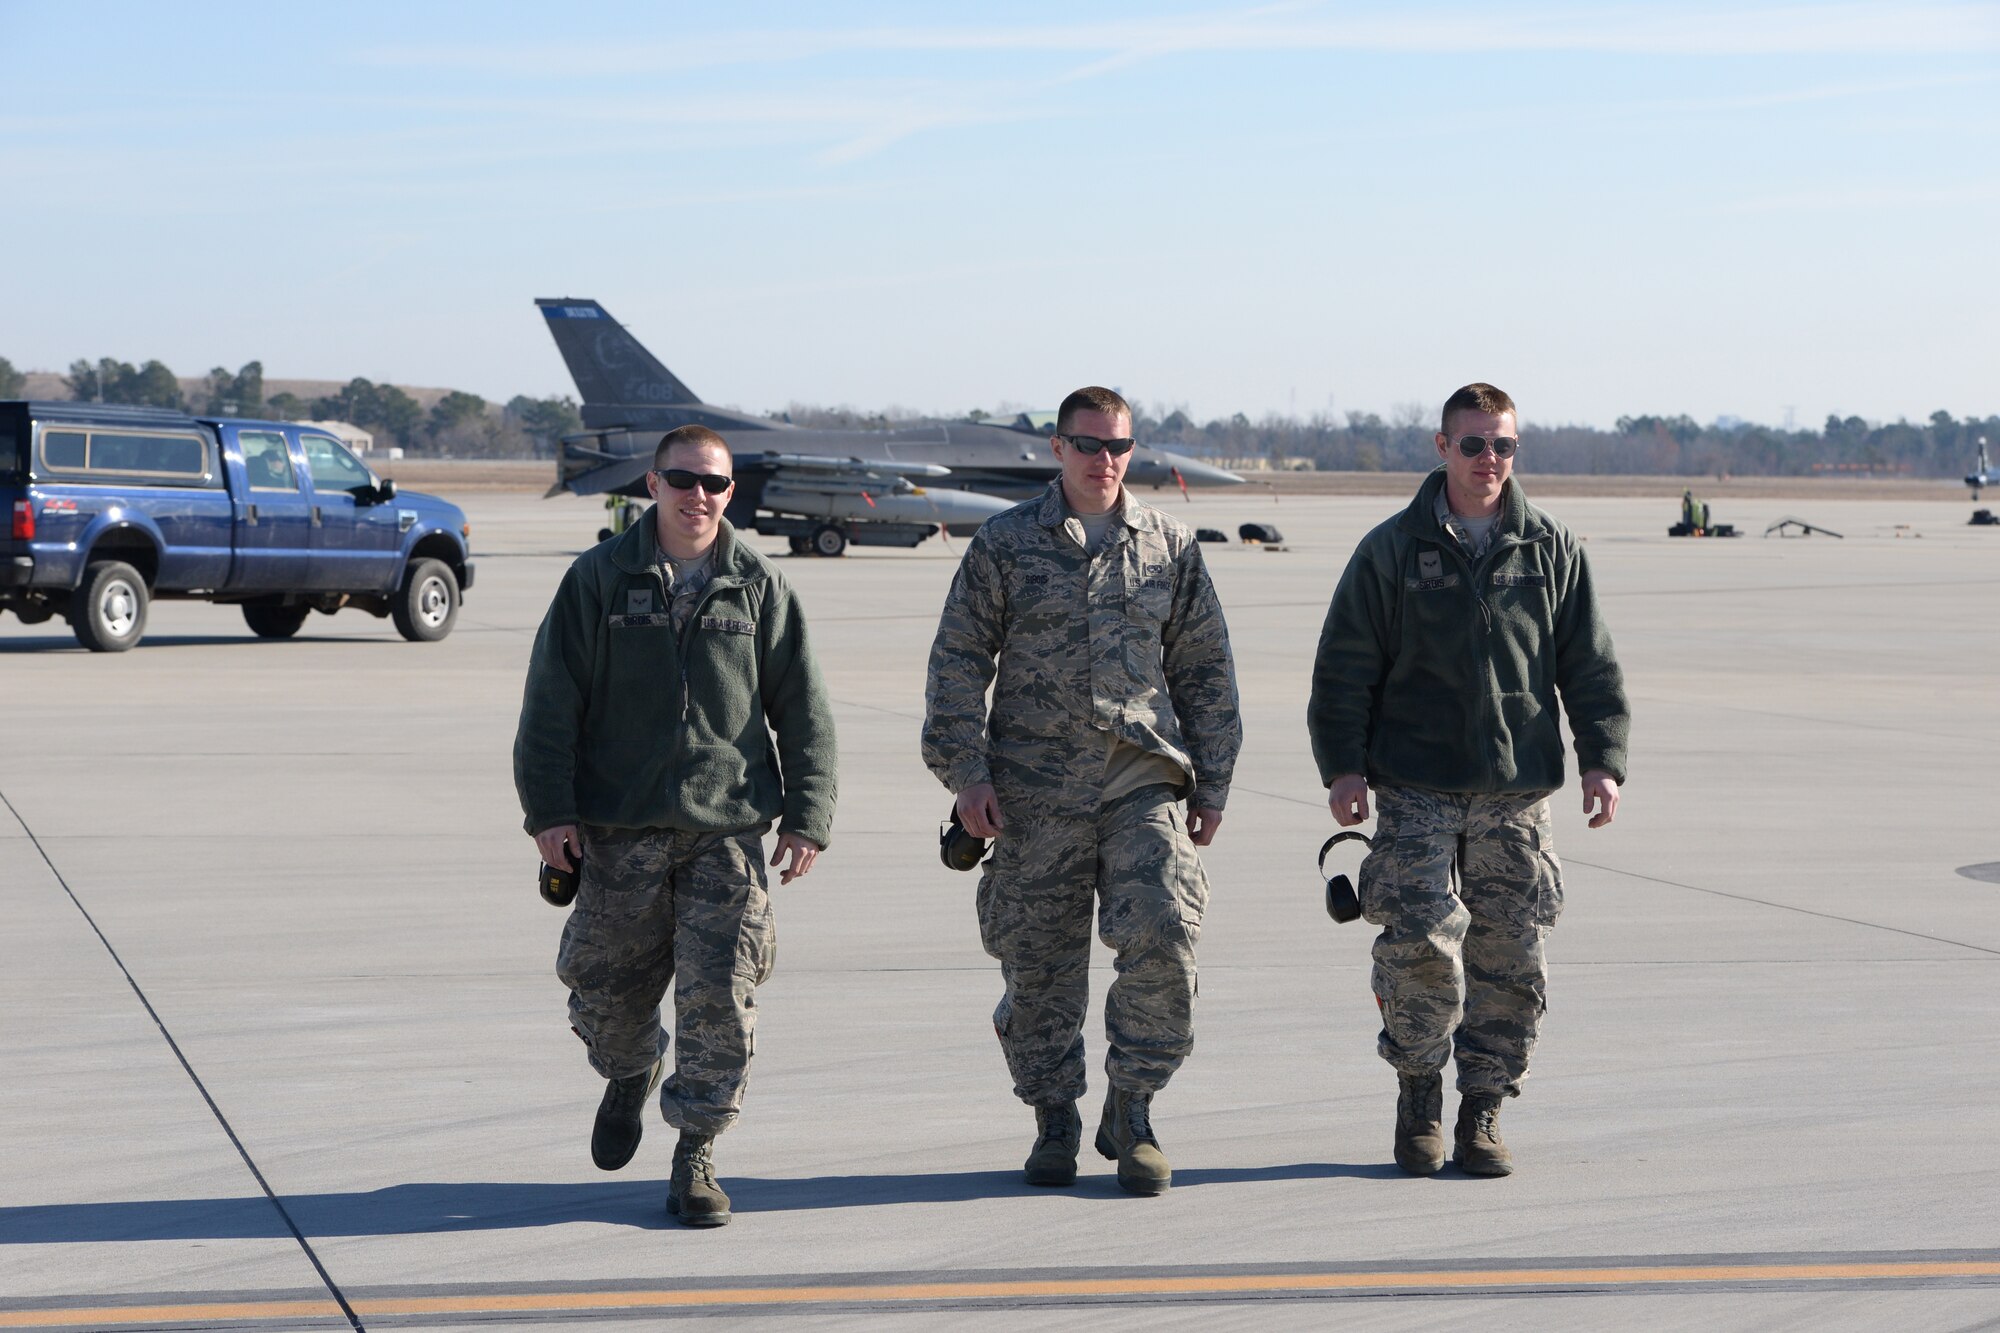 Airman 1st Class Nicholas Sirois, Staff Sgt. Michael Sirois and Airman 1st Class Patrick Sirois depart the flightline while particpating in Sentry Savannah 15-1, Feb 12, 2015, Savannah, Ga.  Sentry Savannah 15-1 is the Air National Guard's largest Fighter Integration, Air-to-Air, training exercise encompassing 4th and 5th generation aircraft.  (U.S. Air National Guard photo by Master Sgt. Ralph Kapustka/Released)